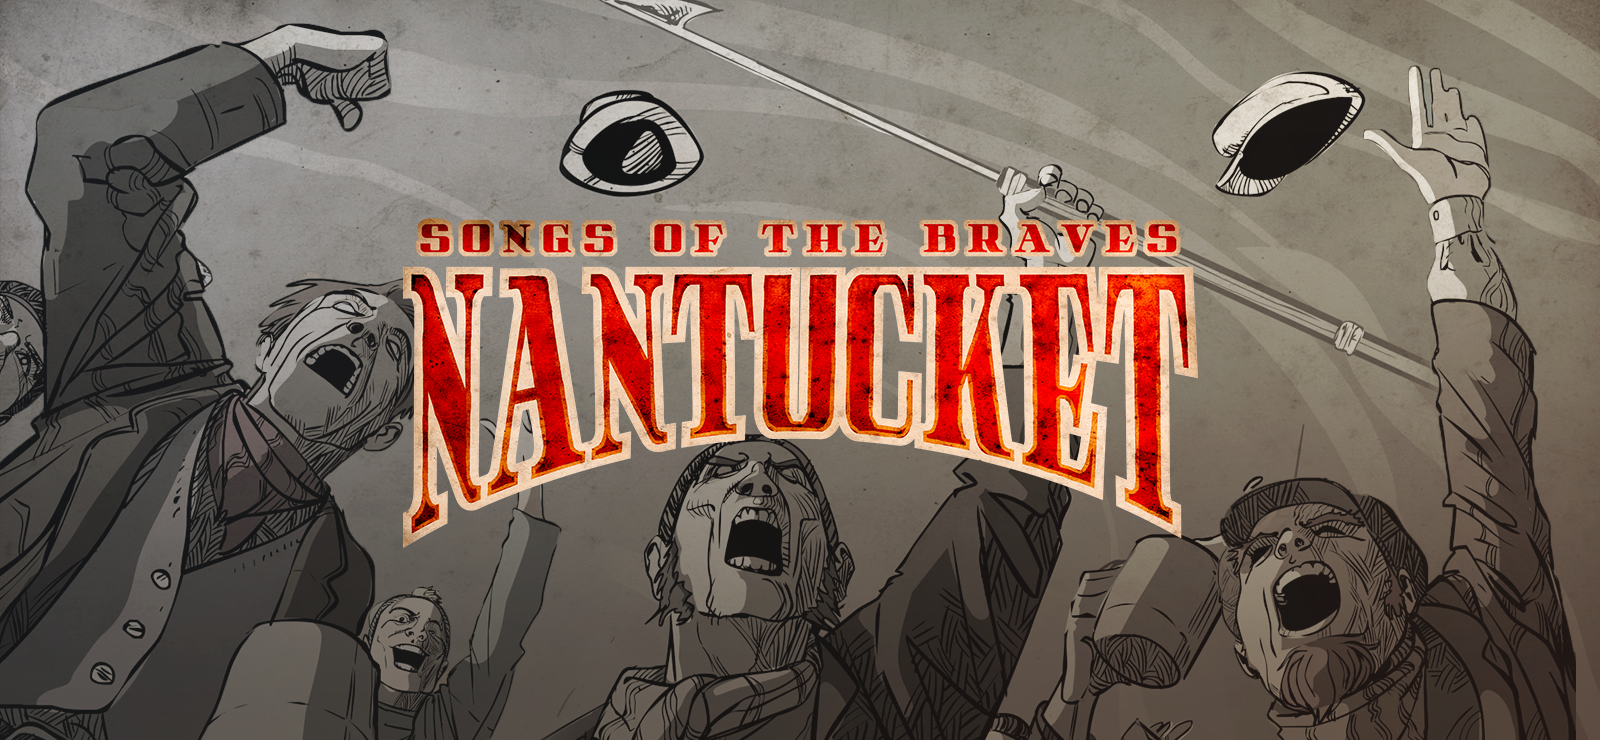 Nantucket - Songs Of The Braves